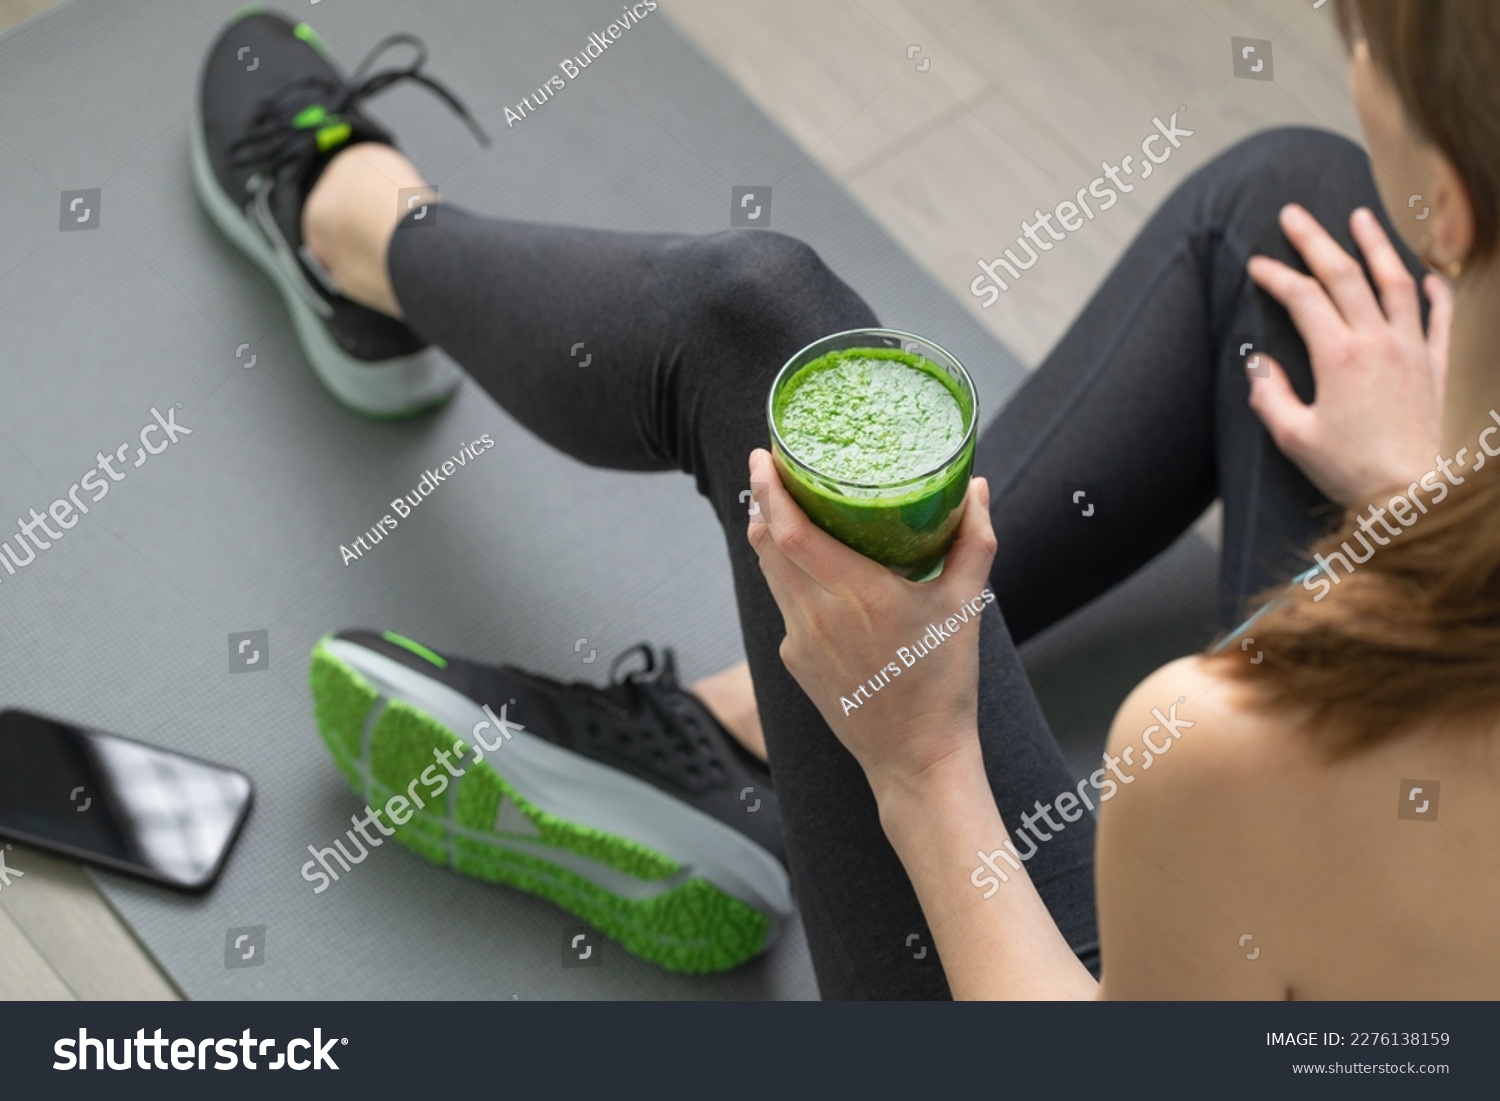 Women's hands tying sport shoes on a gray workout mat. With smoothie for detox in background. Healthy living, dieting lifestyle. #2276138159